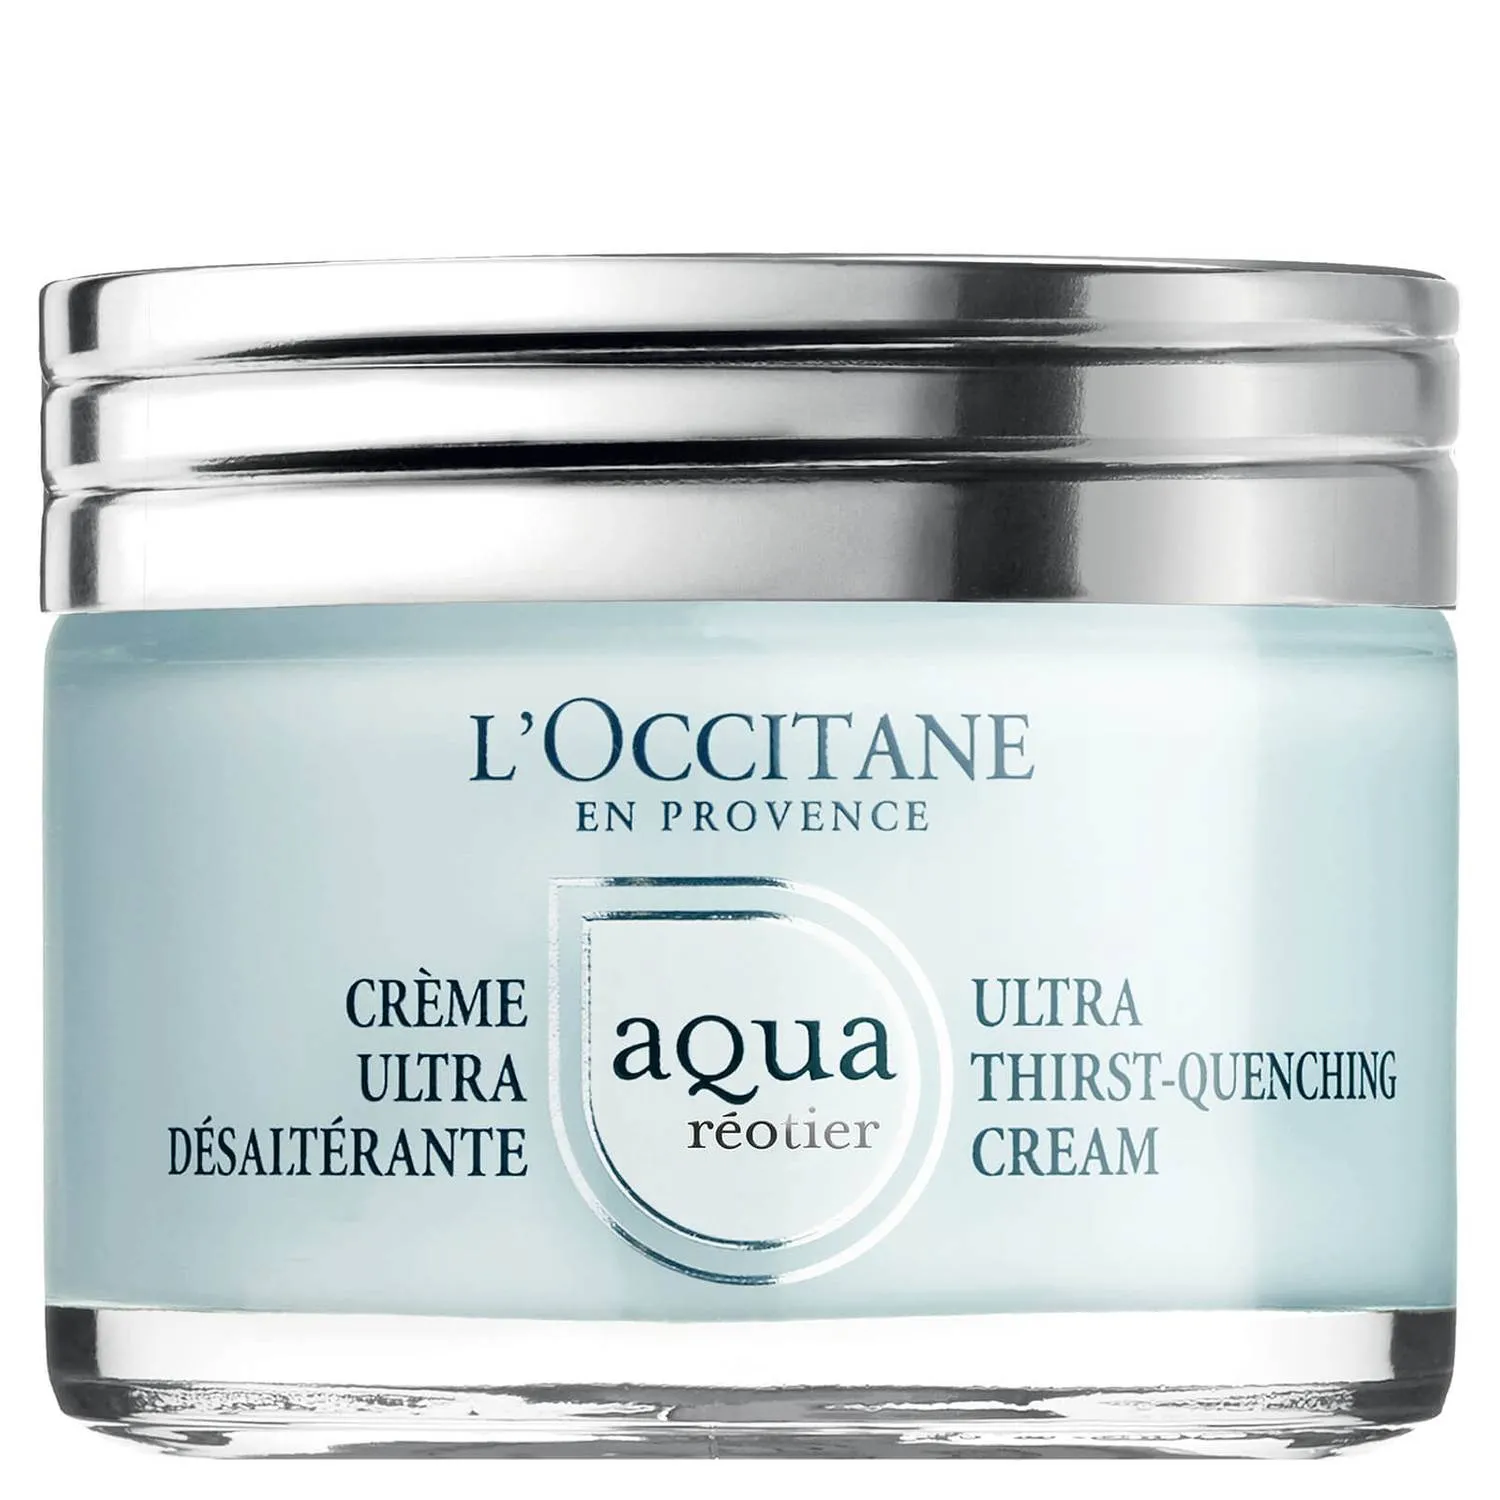 Aqua Reotier Ultra Thirst-Quenching Cream by L'Occitane, the best comforting French face cream.